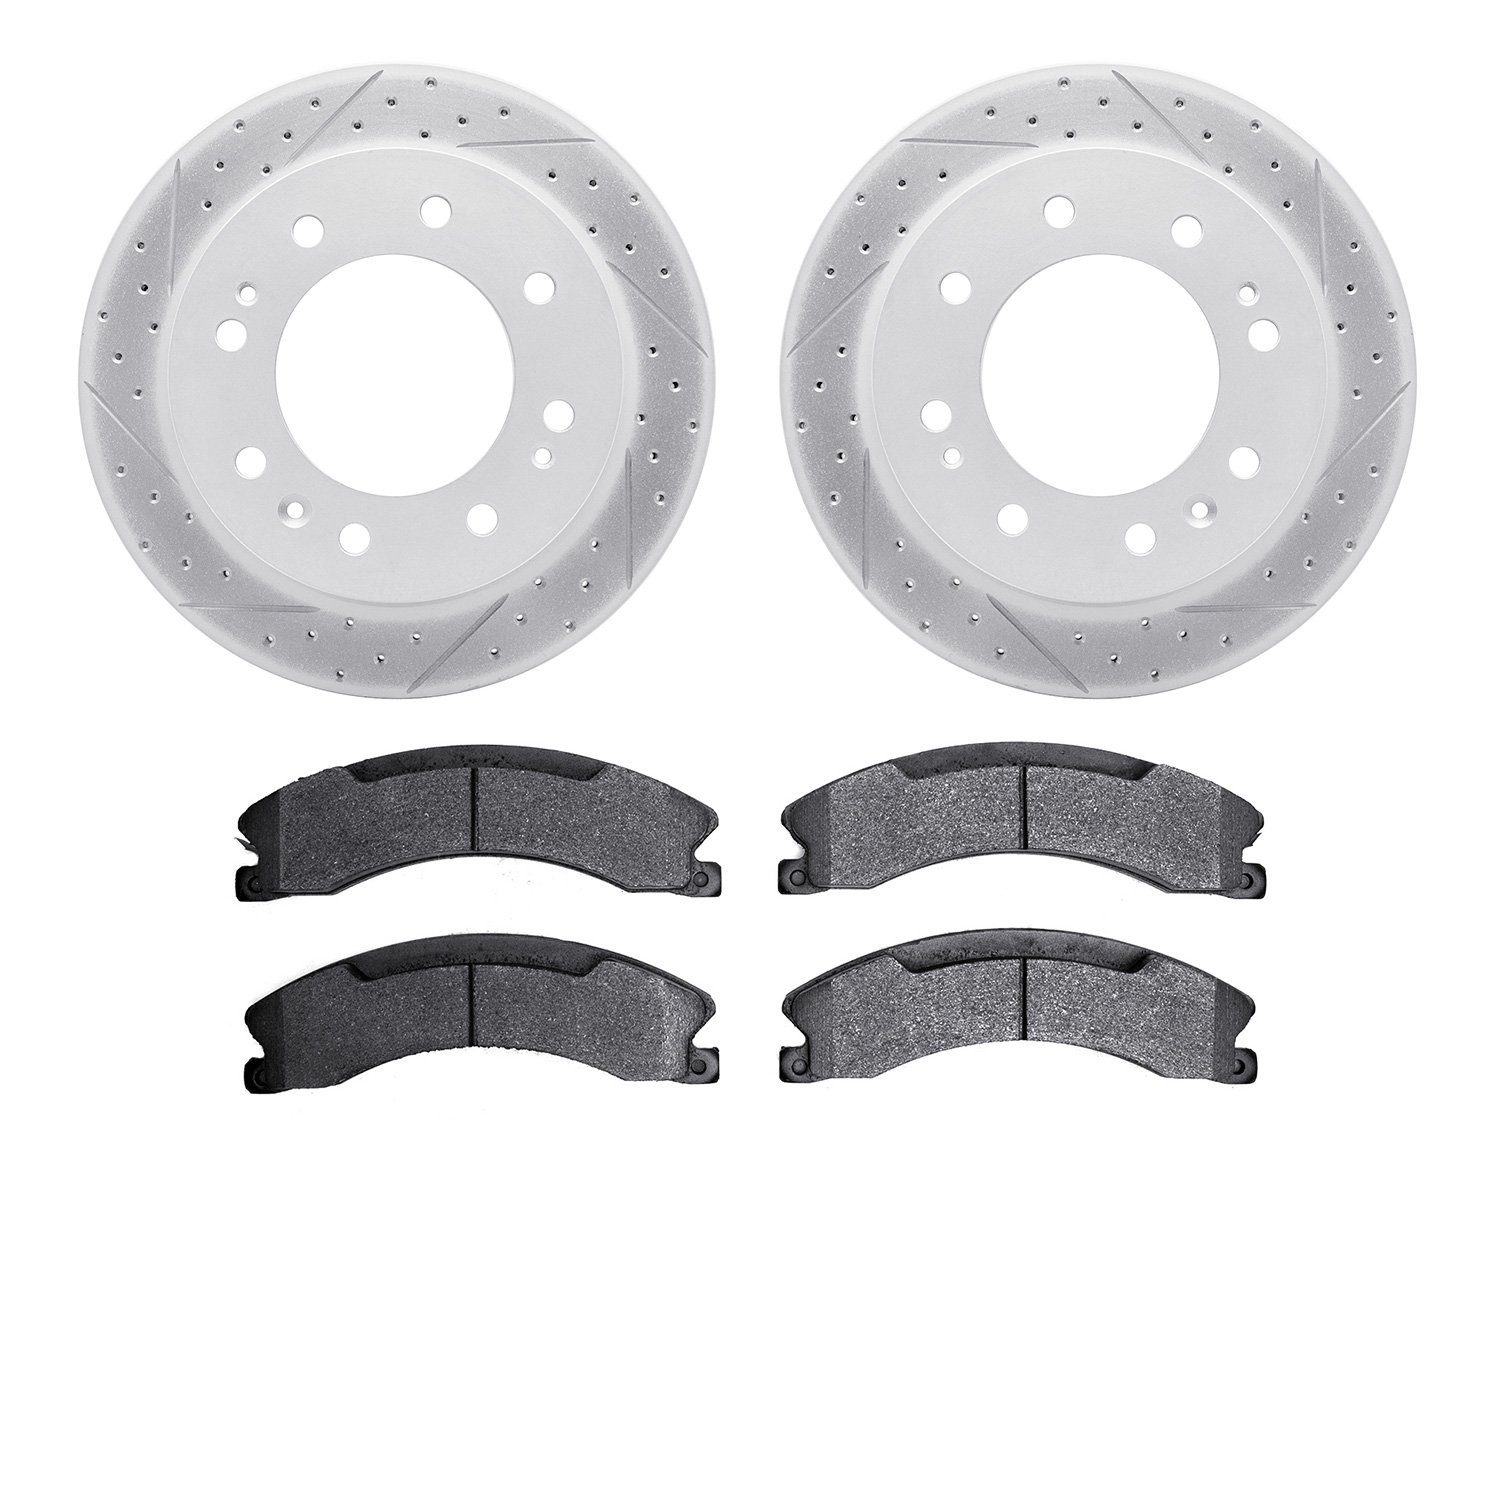 2402-48030 Geoperformance Drilled/Slotted Brake Rotors with Ultimate-Duty Brake Pads Kit, 2011-2019 GM, Position: Front